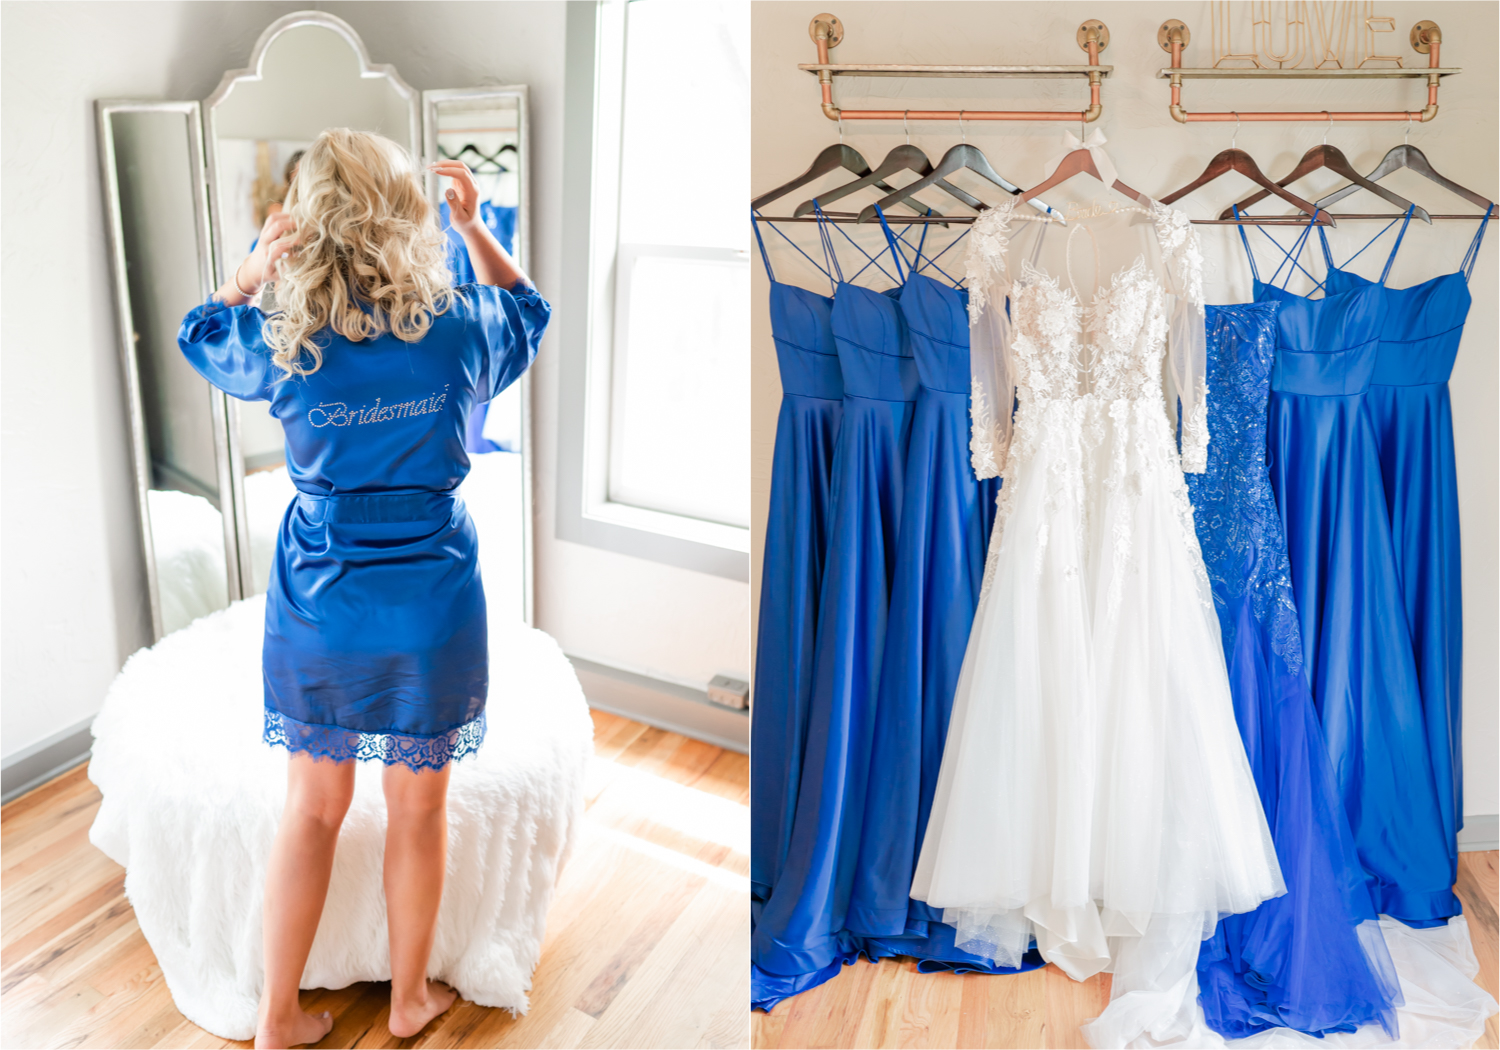 Romantic and Rustic Wedding at The Mill in Windsor | Britni Girard Photography | Colorado based wedding photography and videography team | Bride and Bridesmaids in Robes in the Bridal House | Royal Blue and White